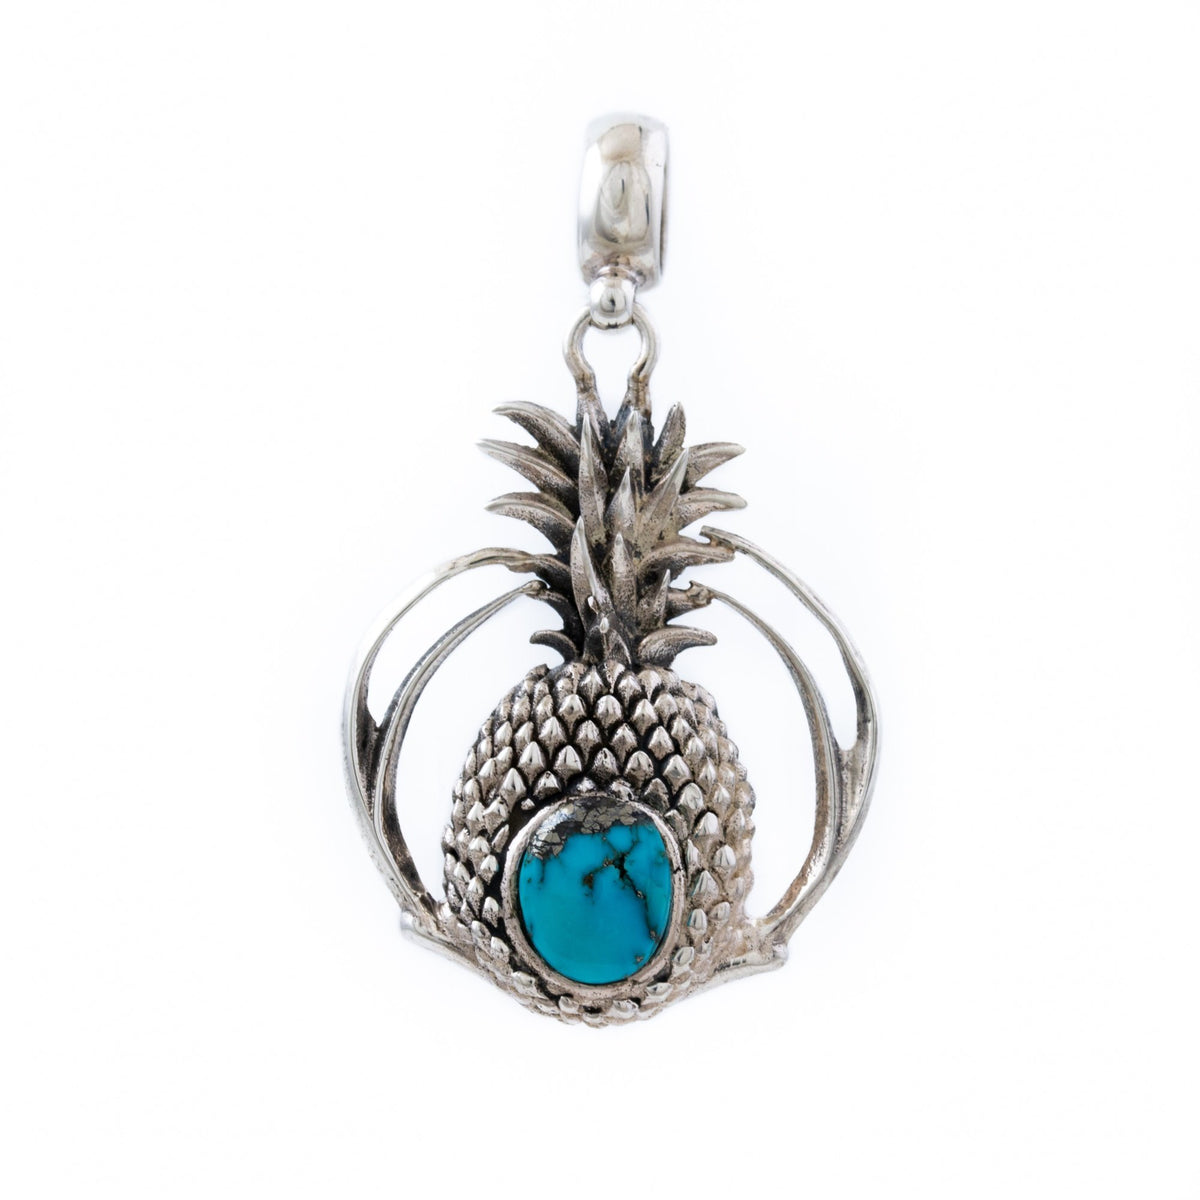 Tropical Sterling Silver "De Ananas" Pendant w/ Blue Turquoise - Kingdom Jewelry